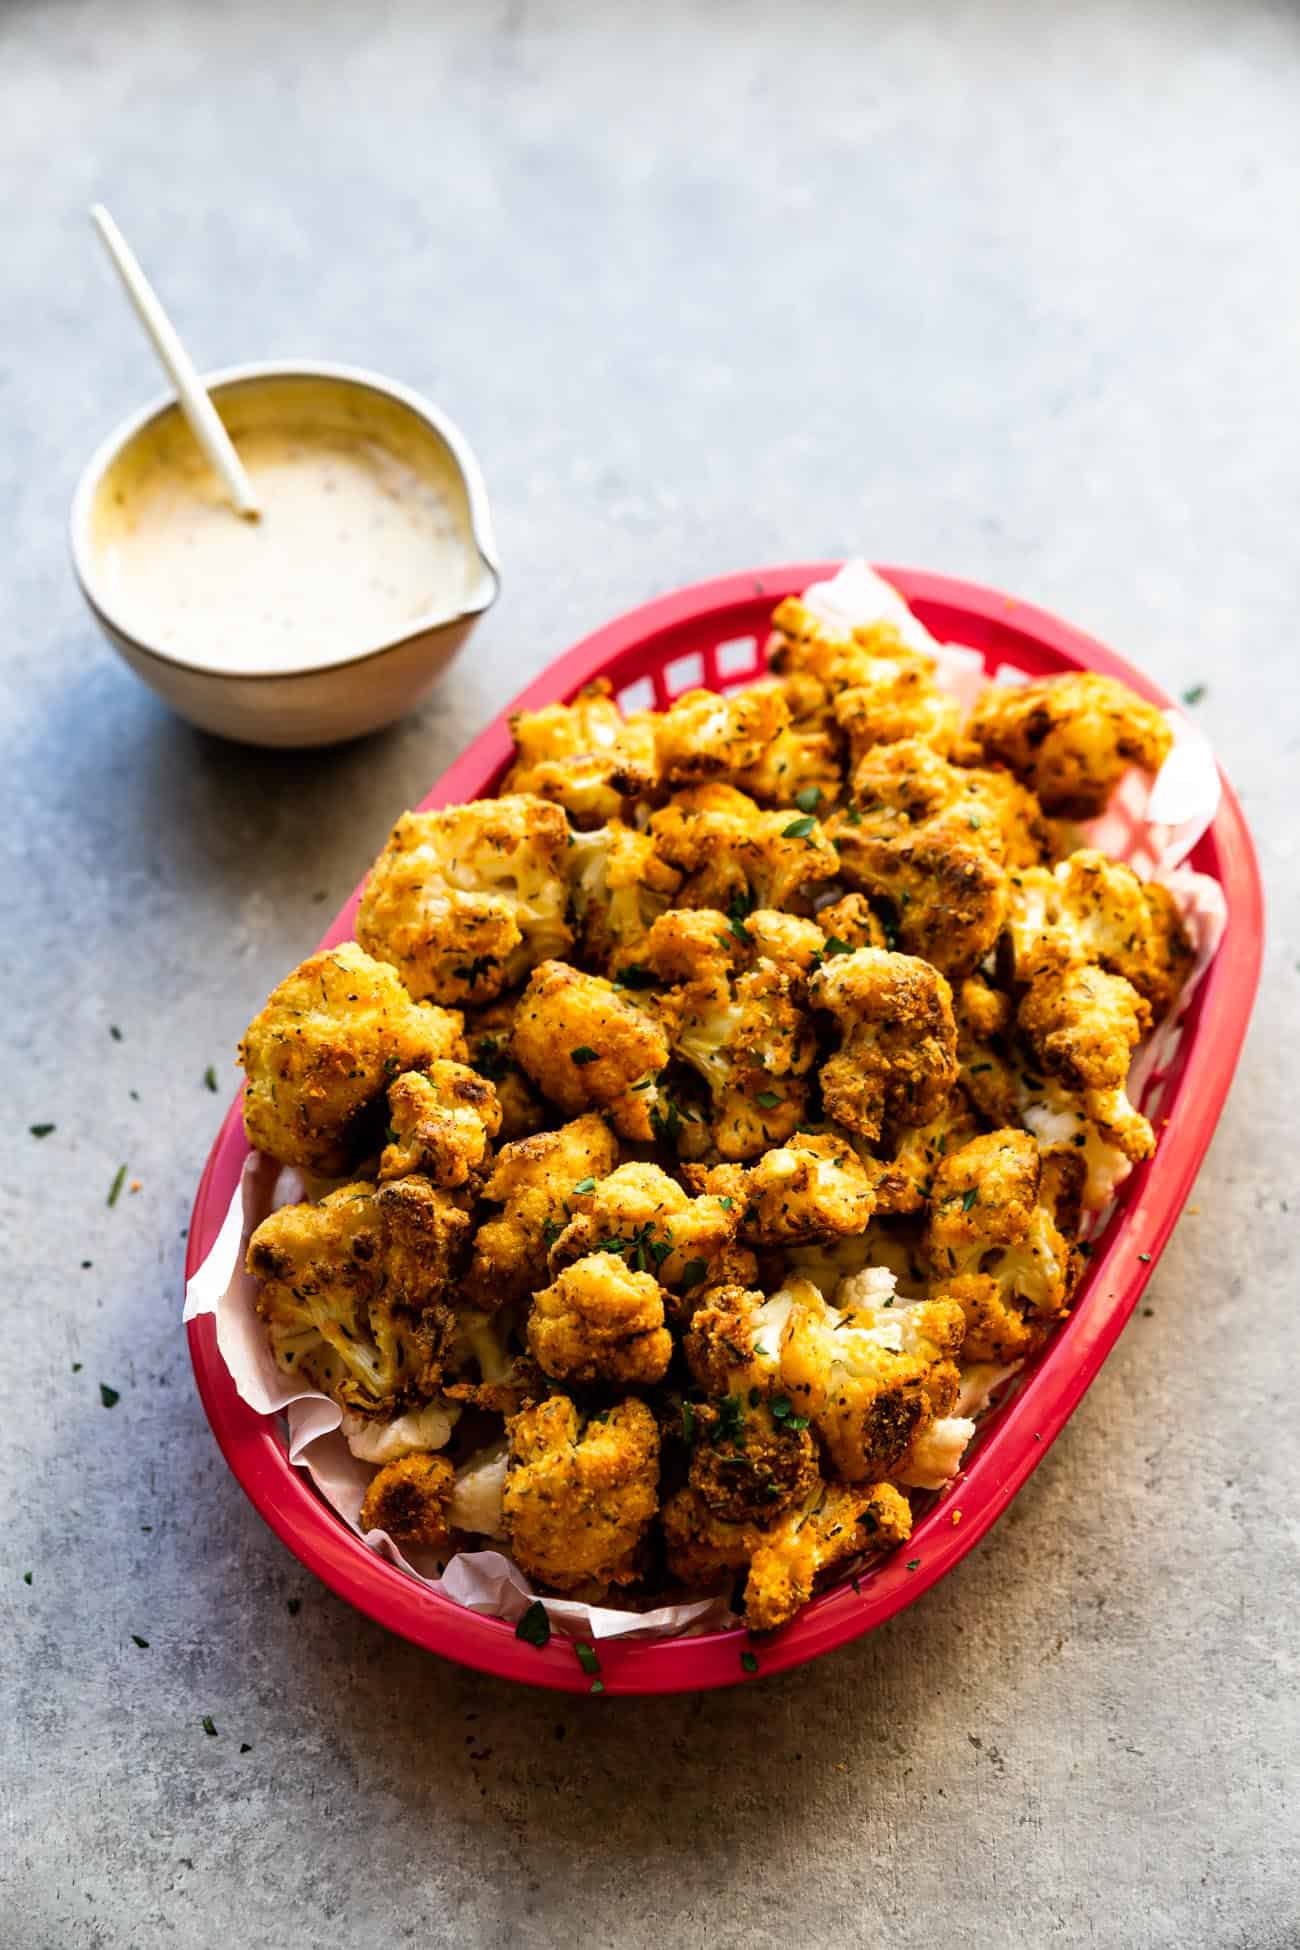 cauliflower nuggets in a red tray with honey mustard sauce on the side